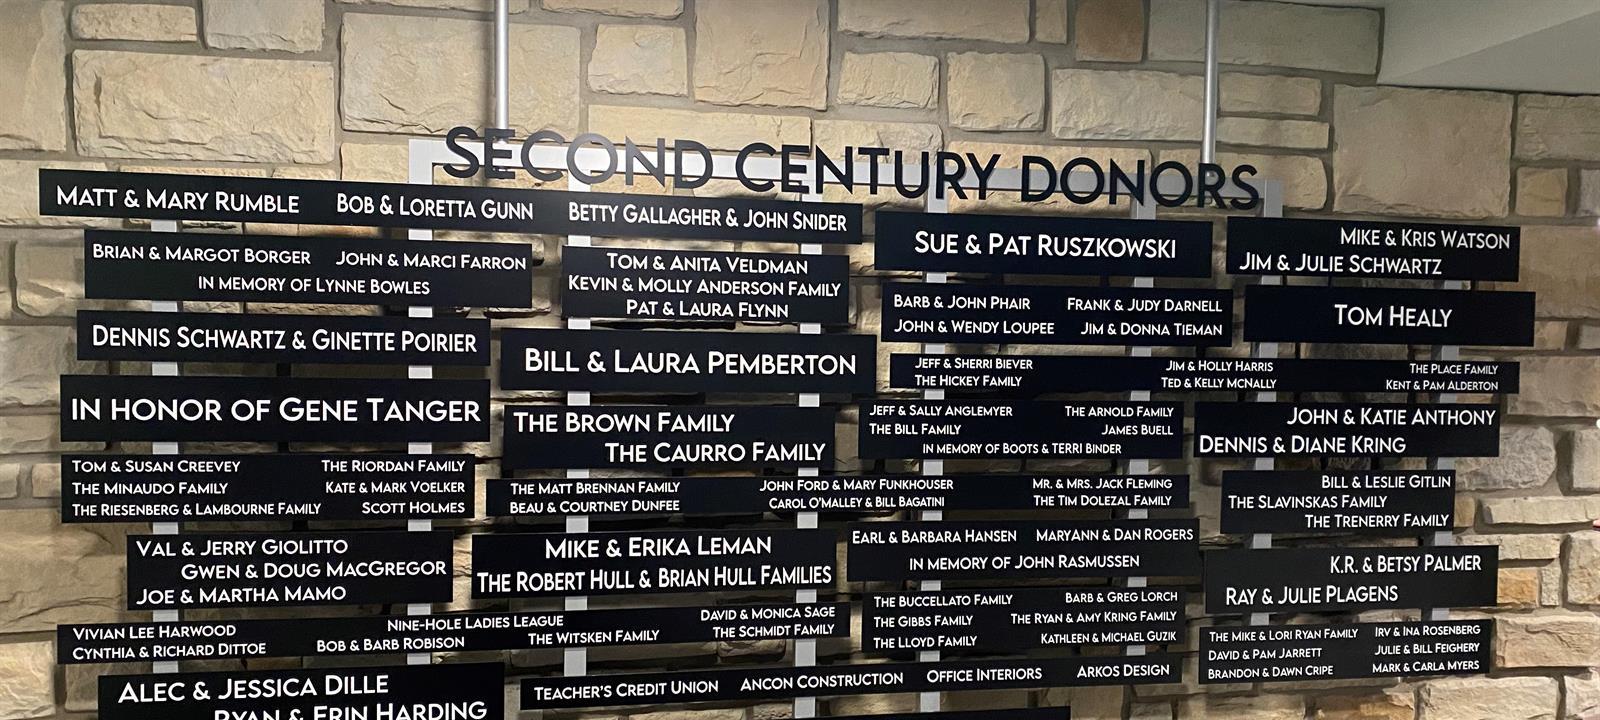 2nd_Century_Donors